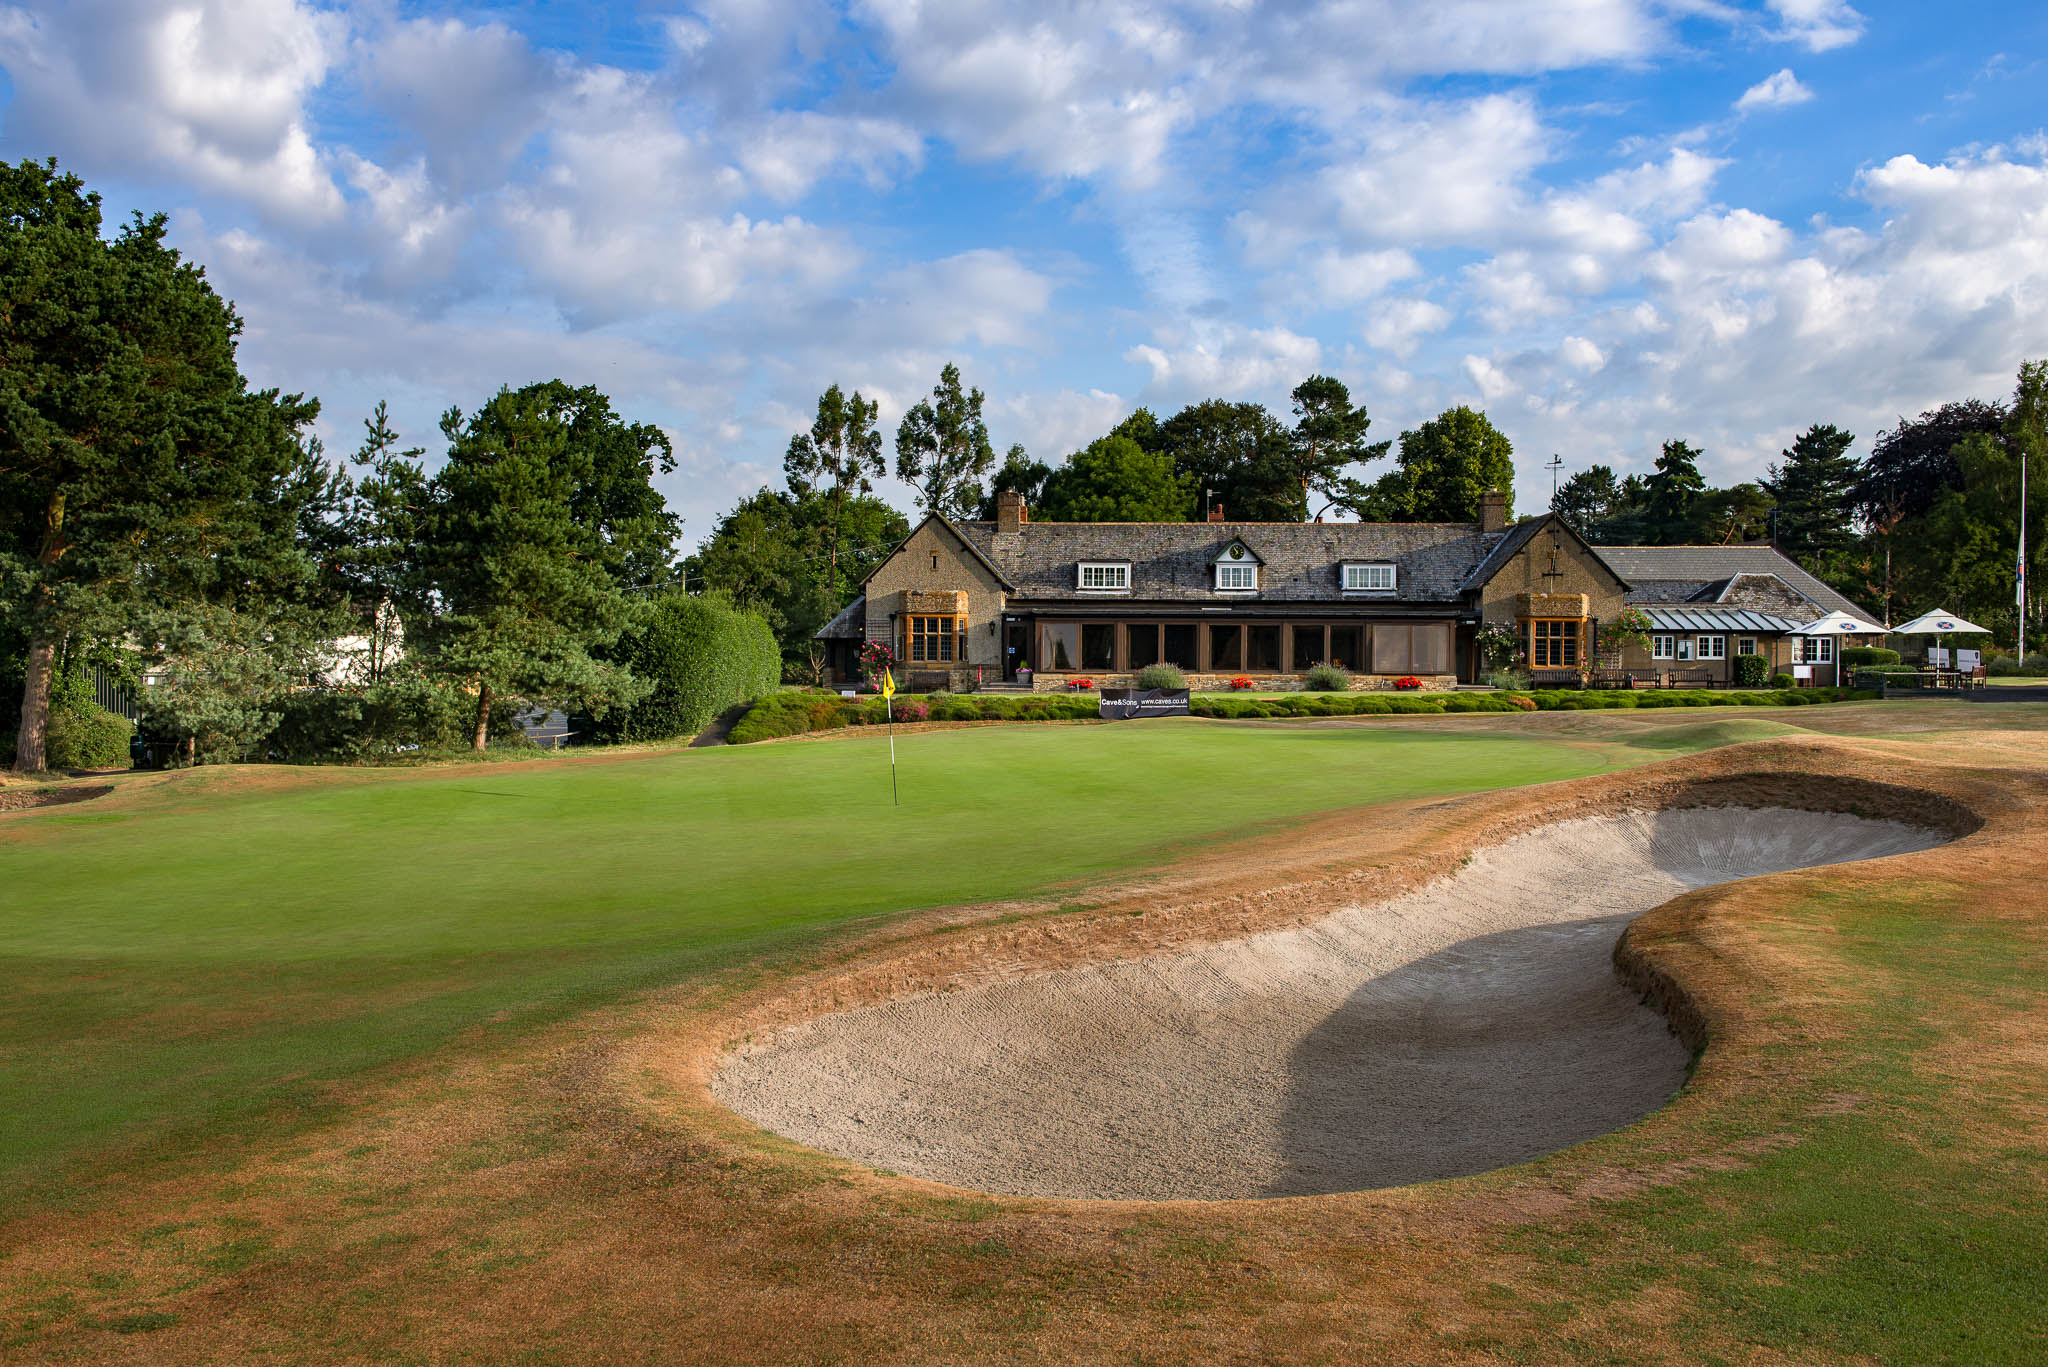 Northamptonshire County Golf Club - as recommended by Your Golfer Magazine